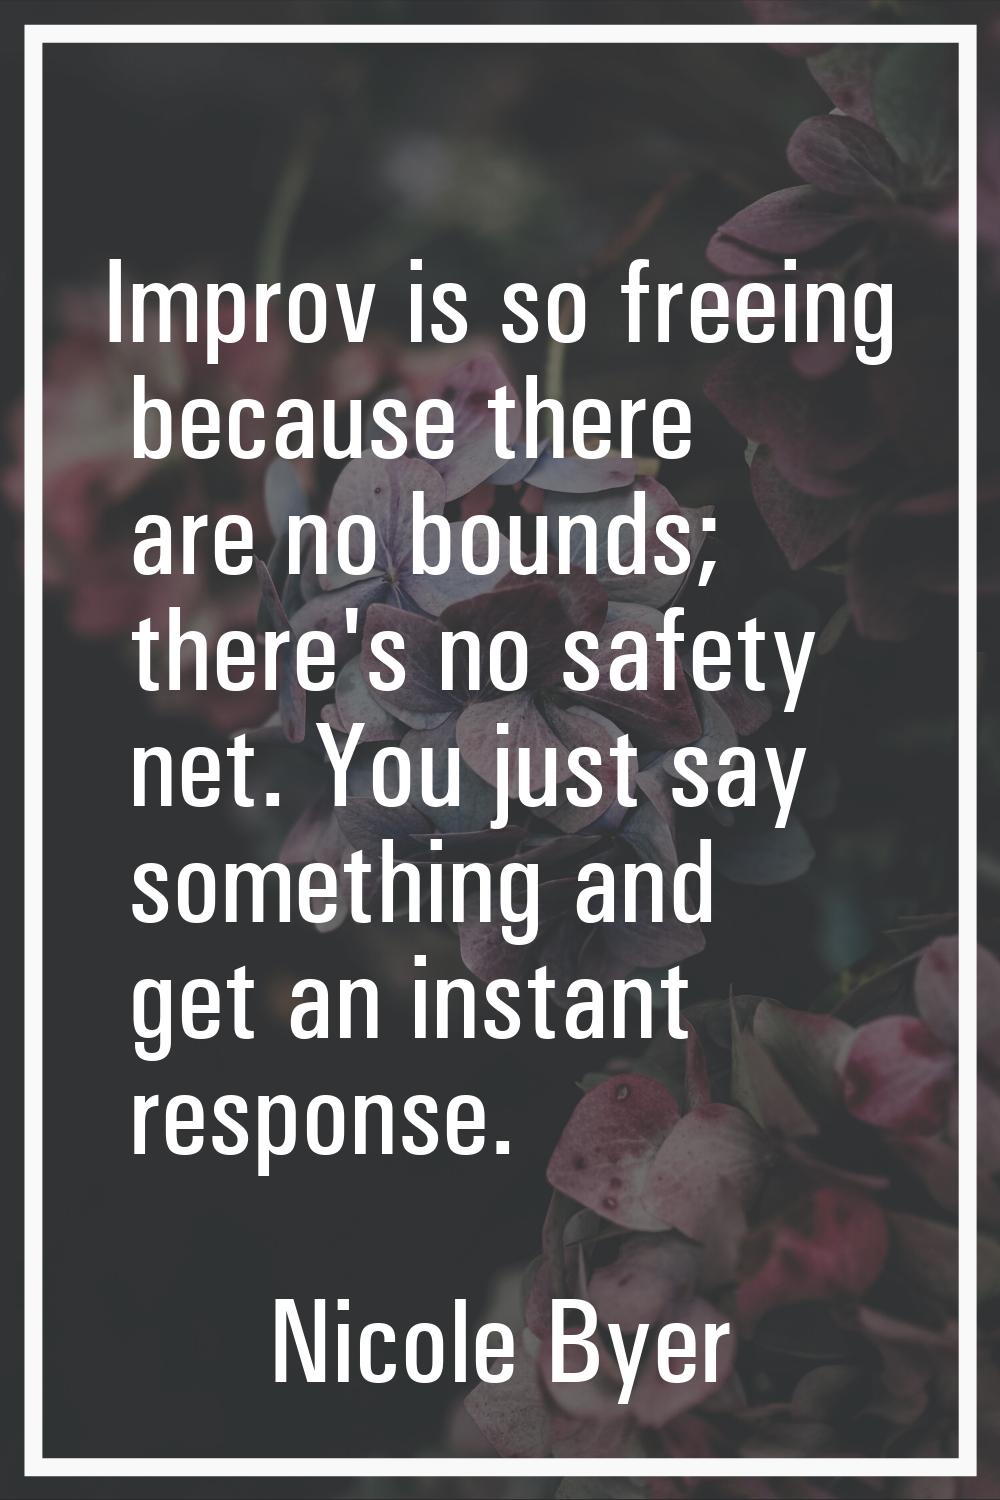 Improv is so freeing because there are no bounds; there's no safety net. You just say something and